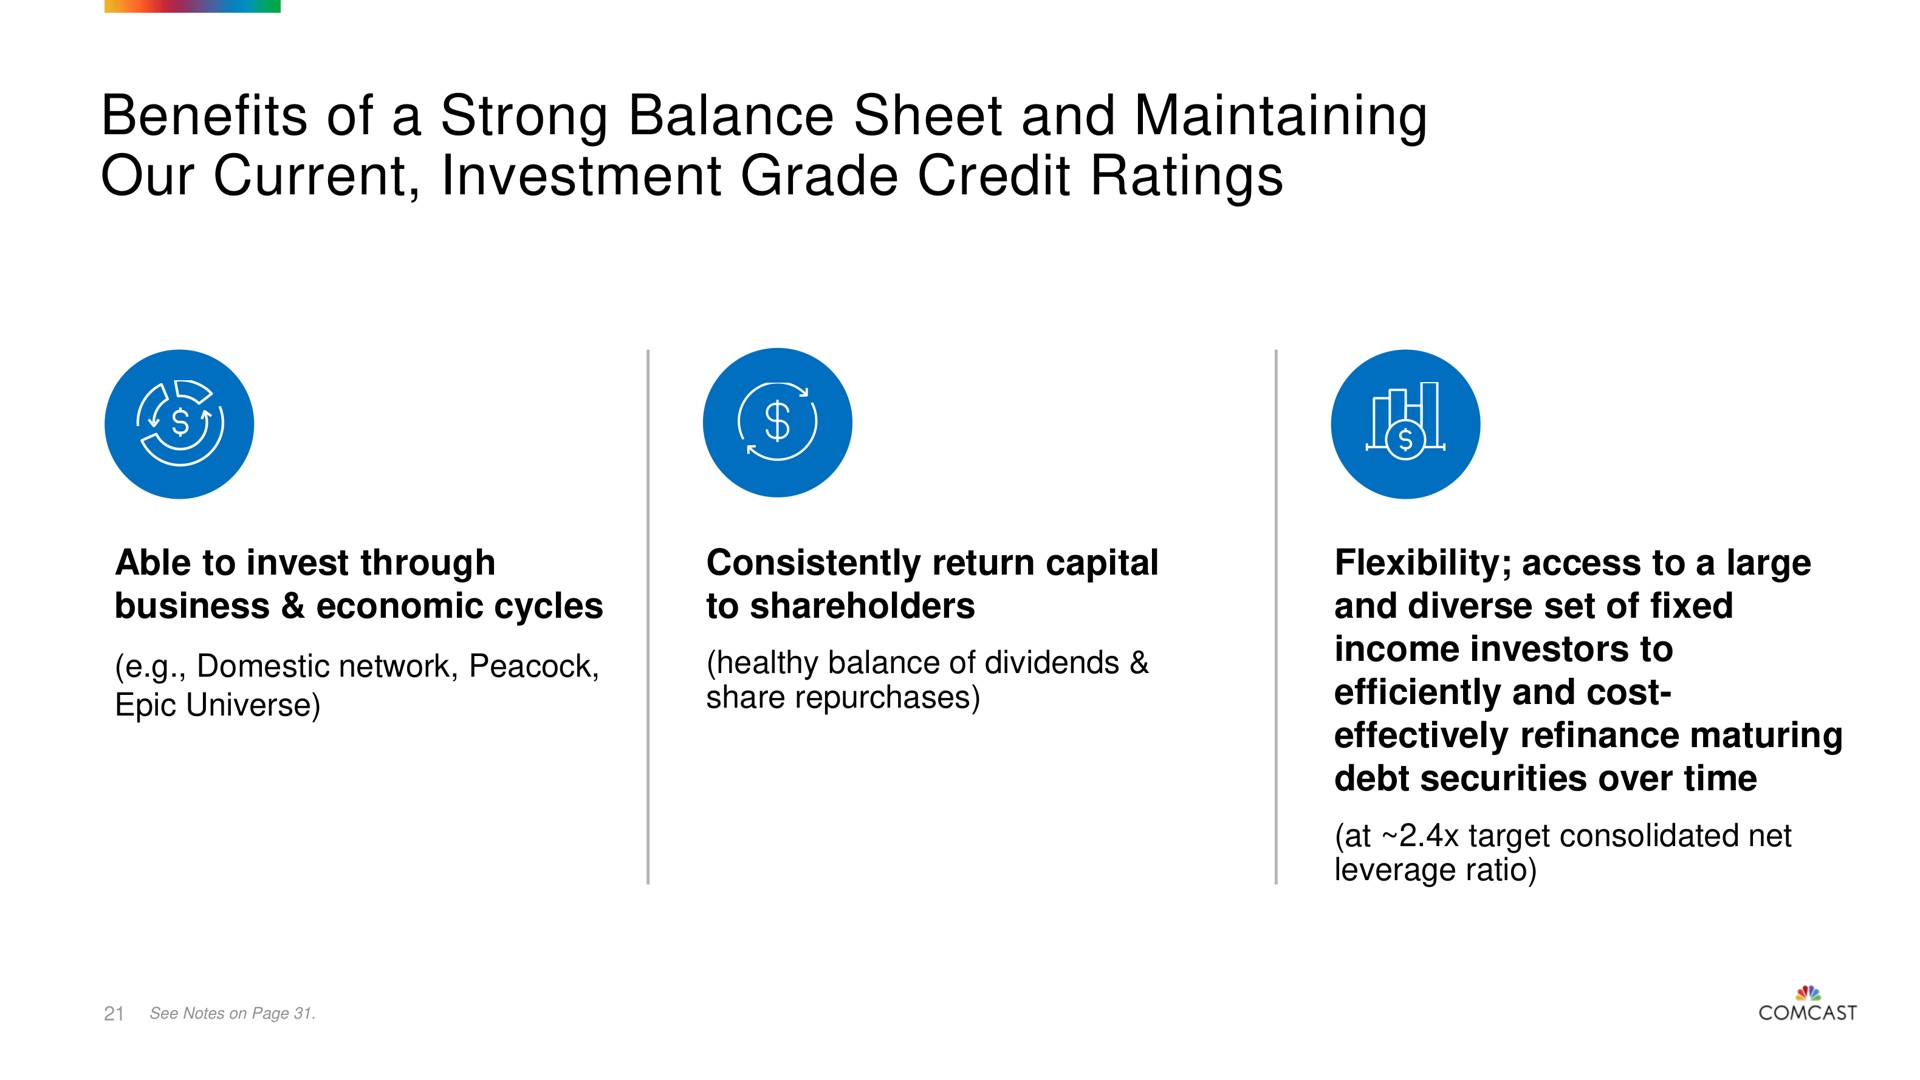 benefits of a strong balance sheet and maintaining our current investment grade credit ratings | Comcast